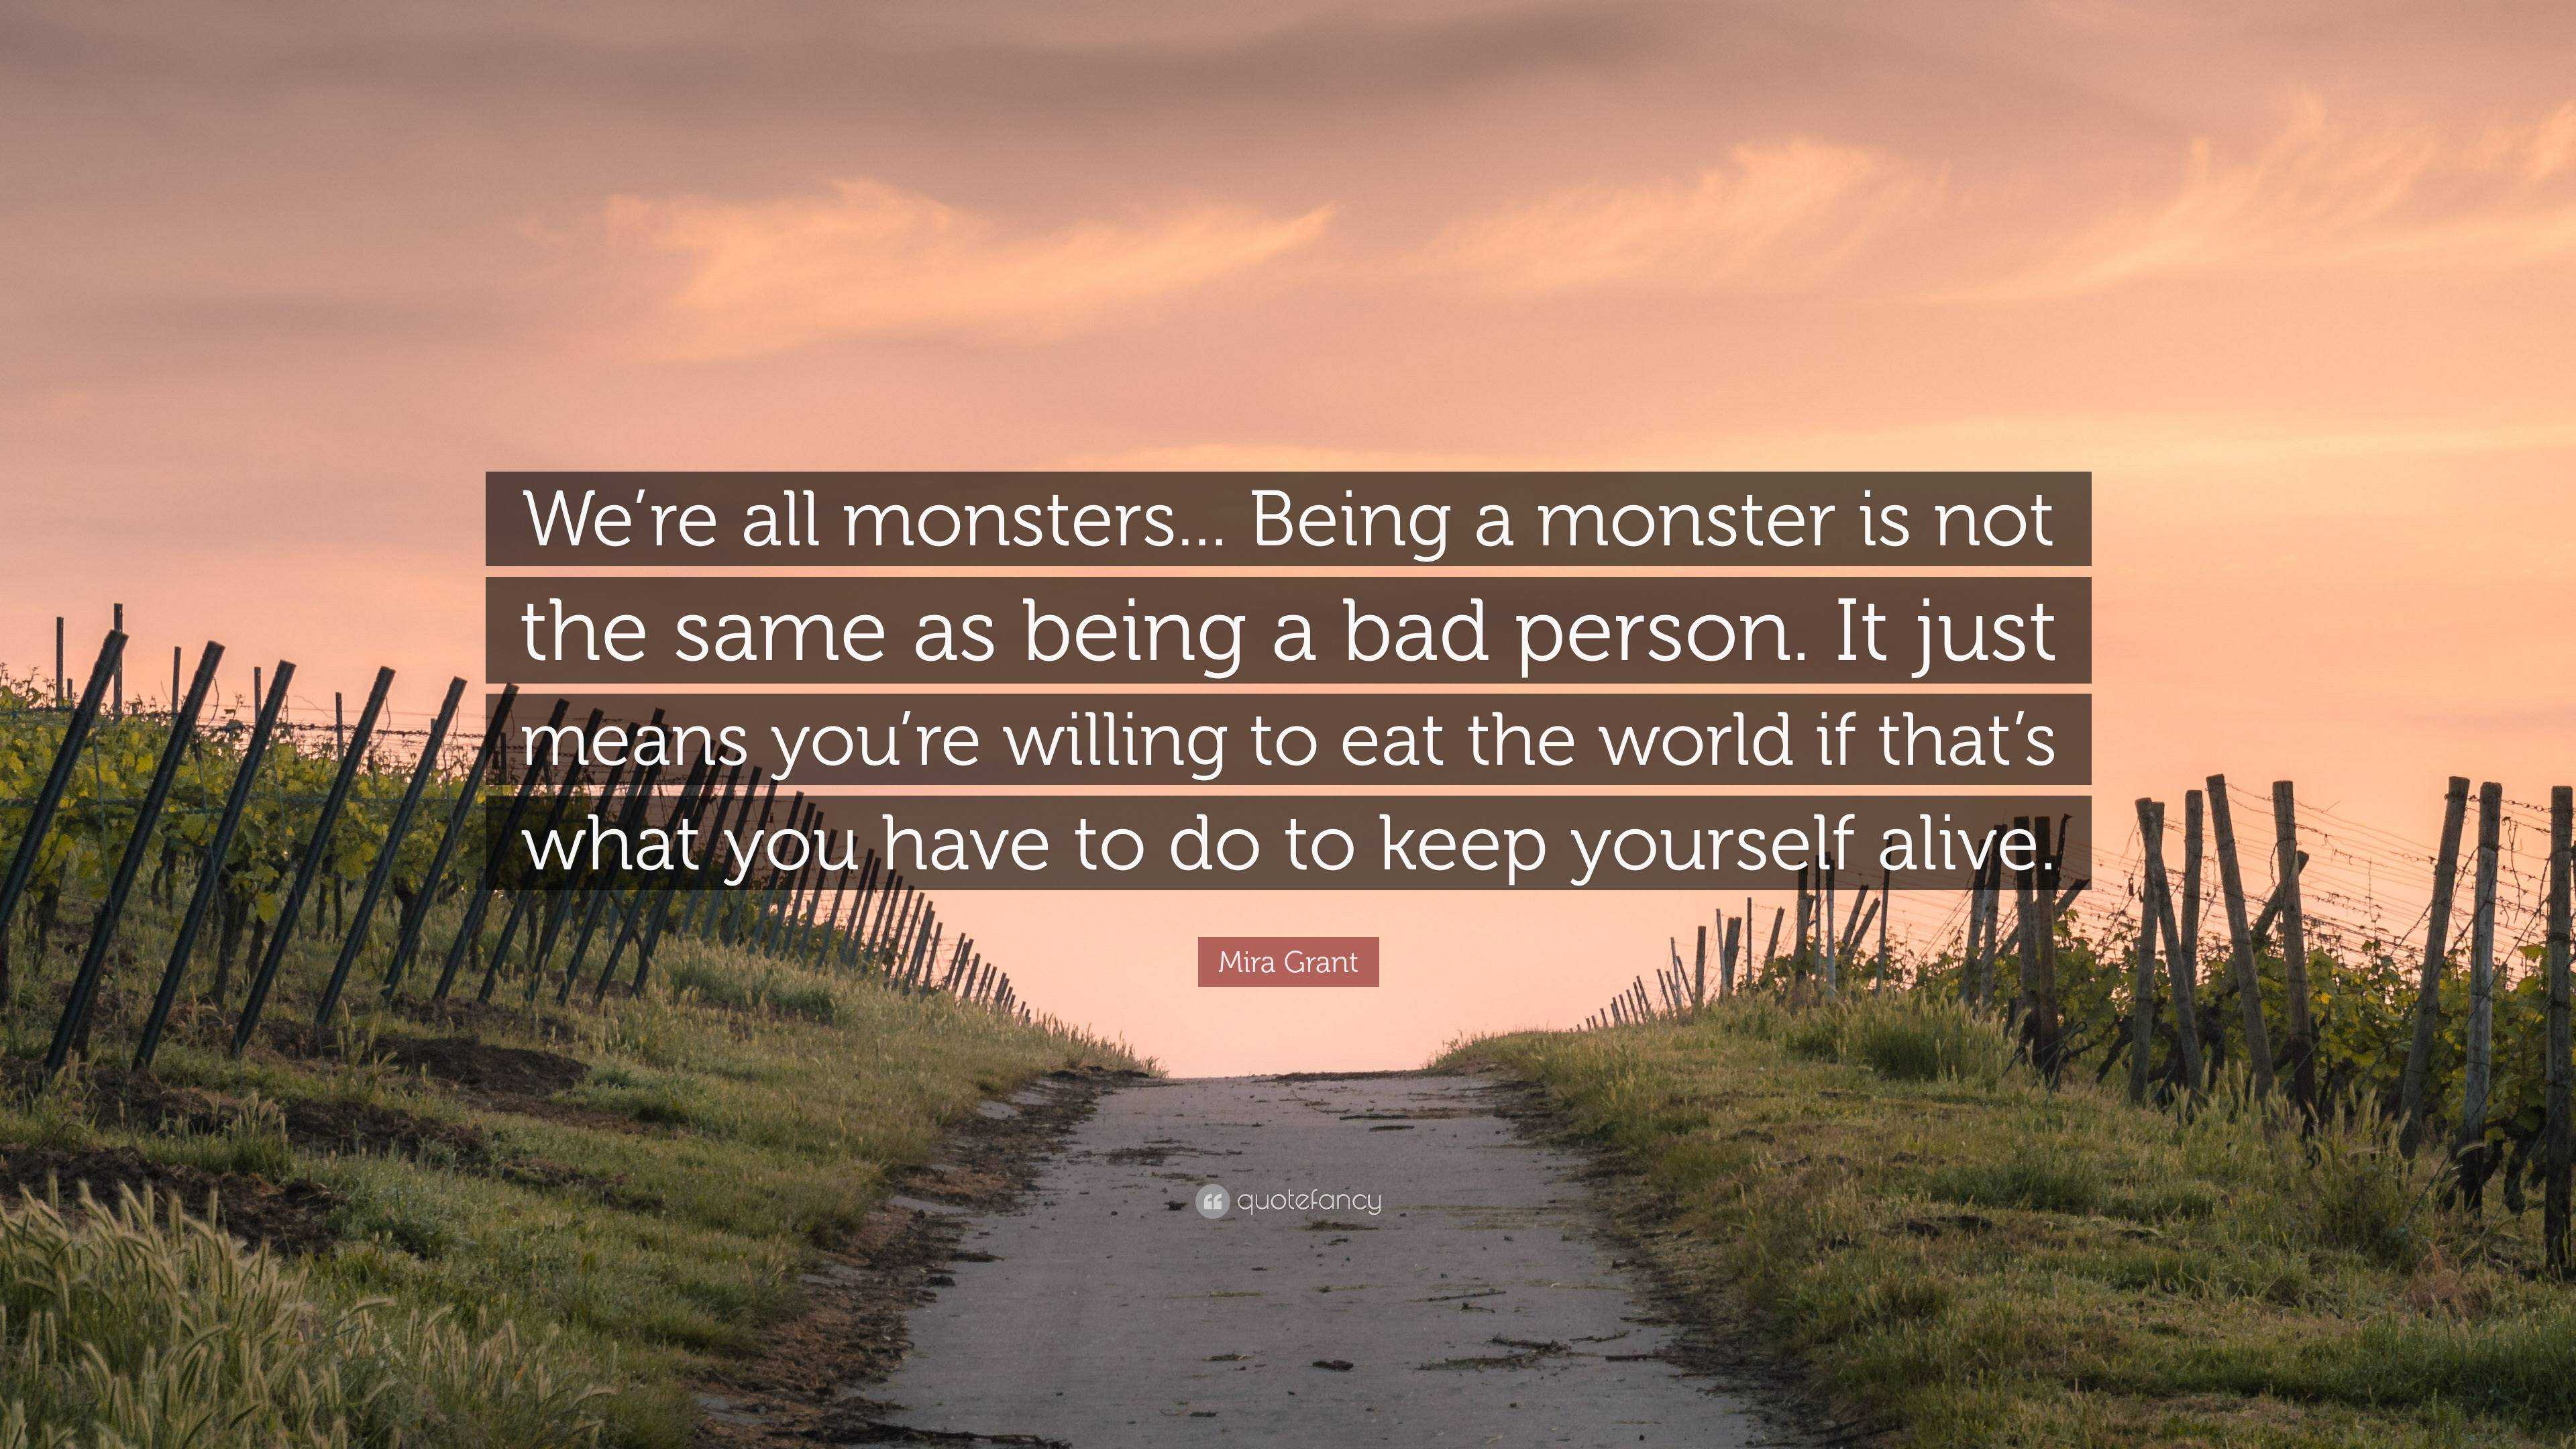 We're Not All Monsters